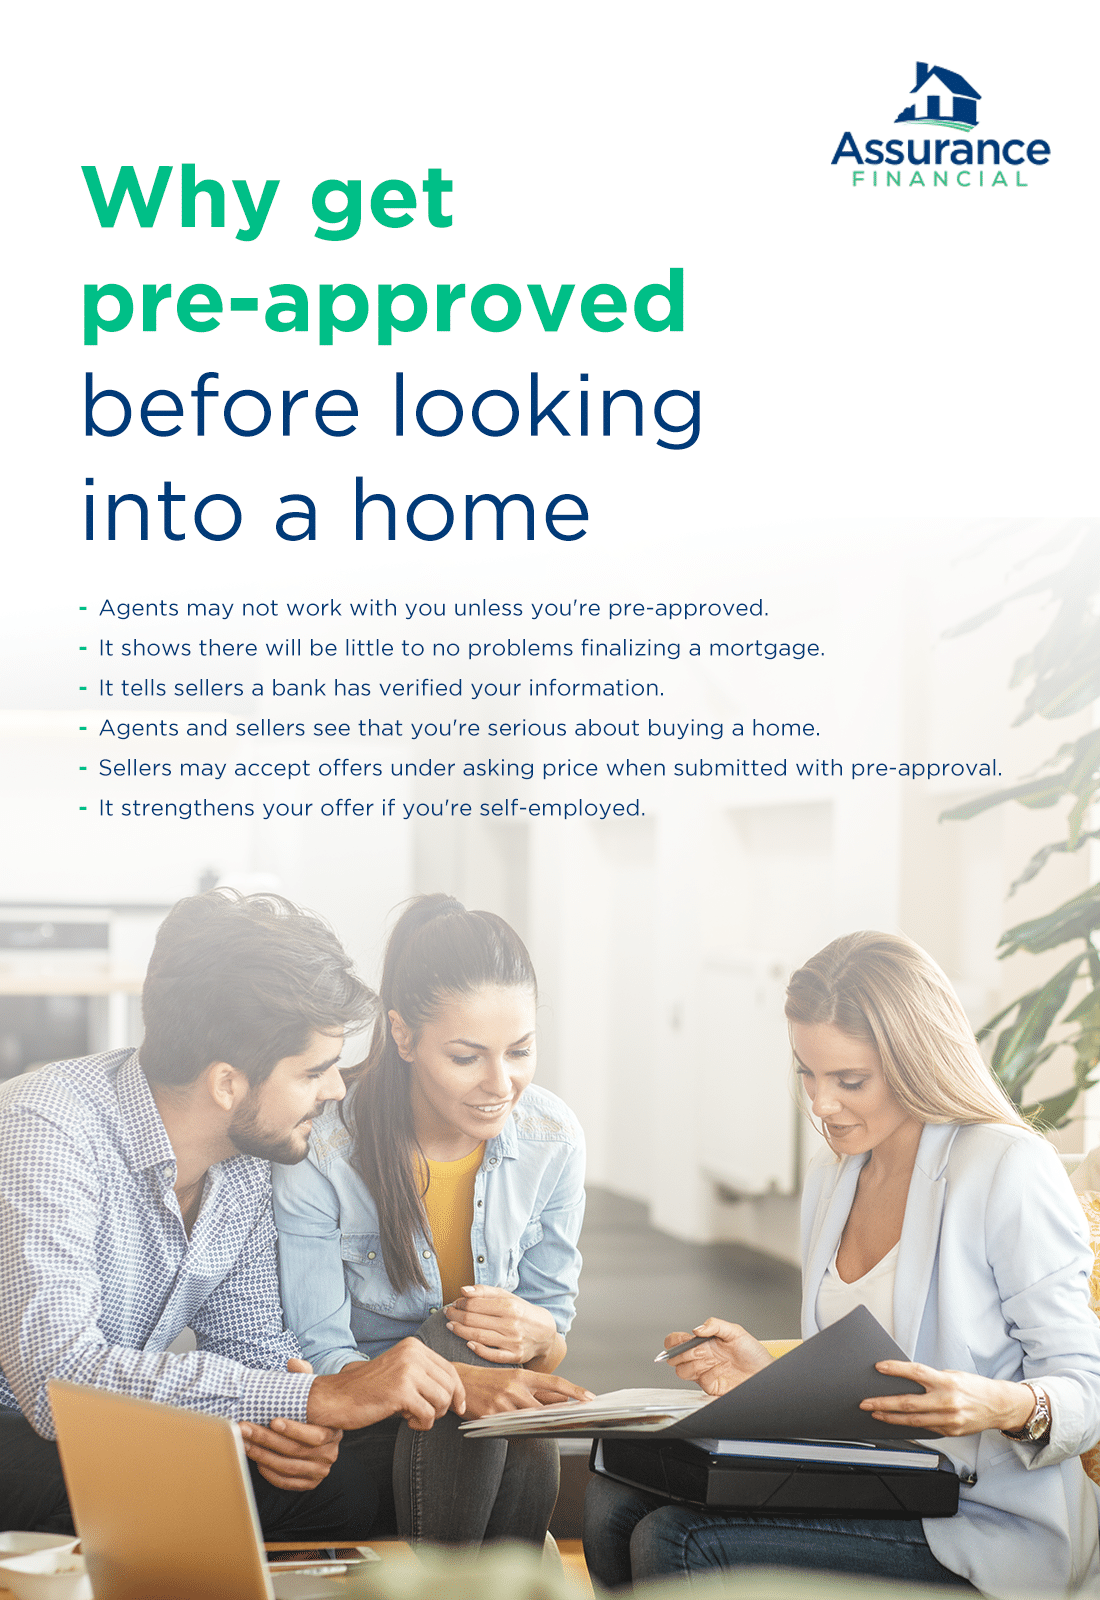 Why you should get pre-approved before looking at a home